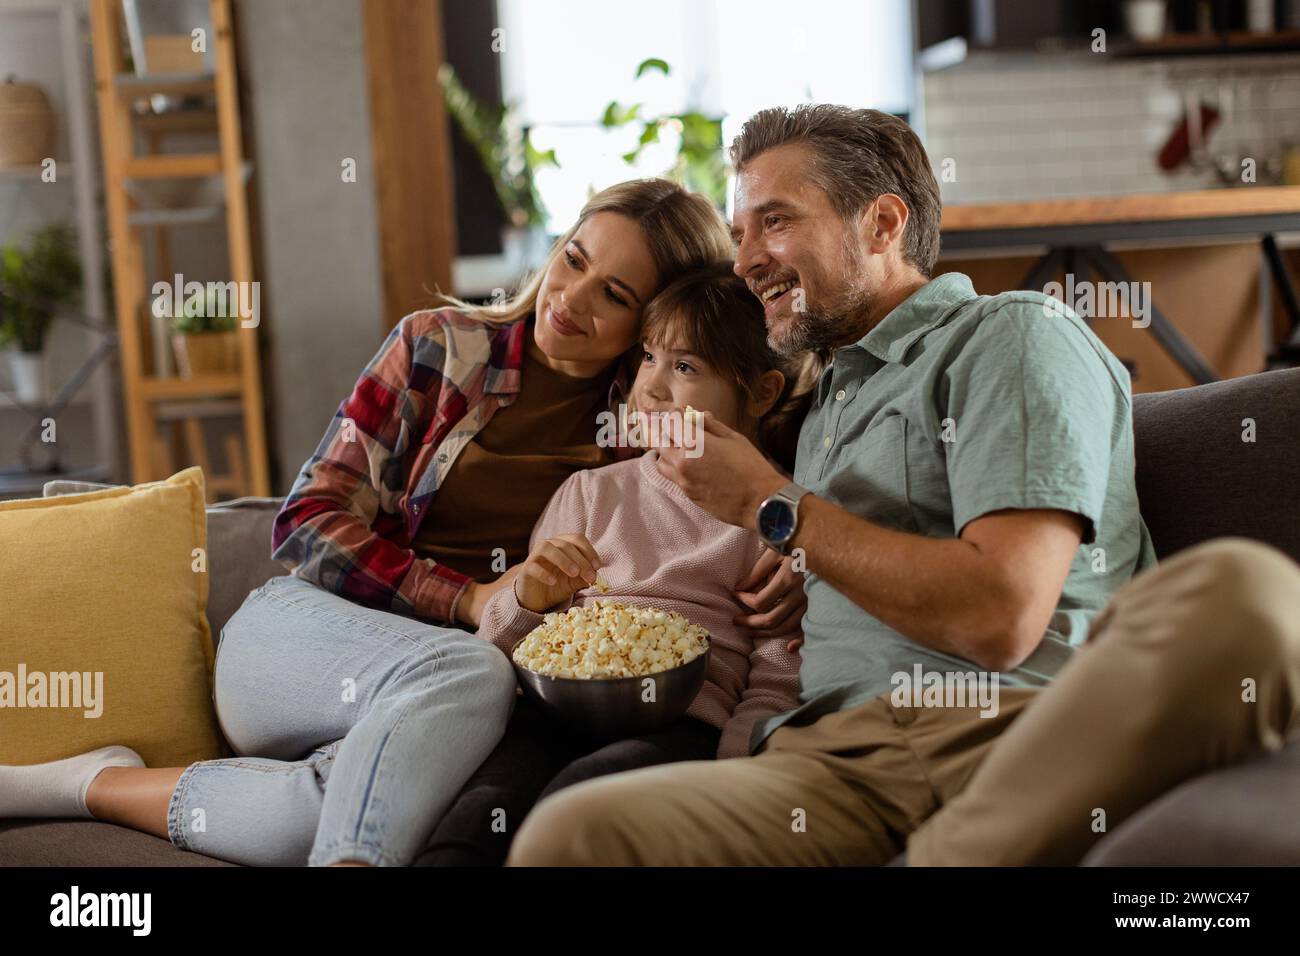 A family of three is comfortably nestled on a couch, their faces reflecting excitement and attentiveness as they share a bowl of popcorn during a susp Stock Photo